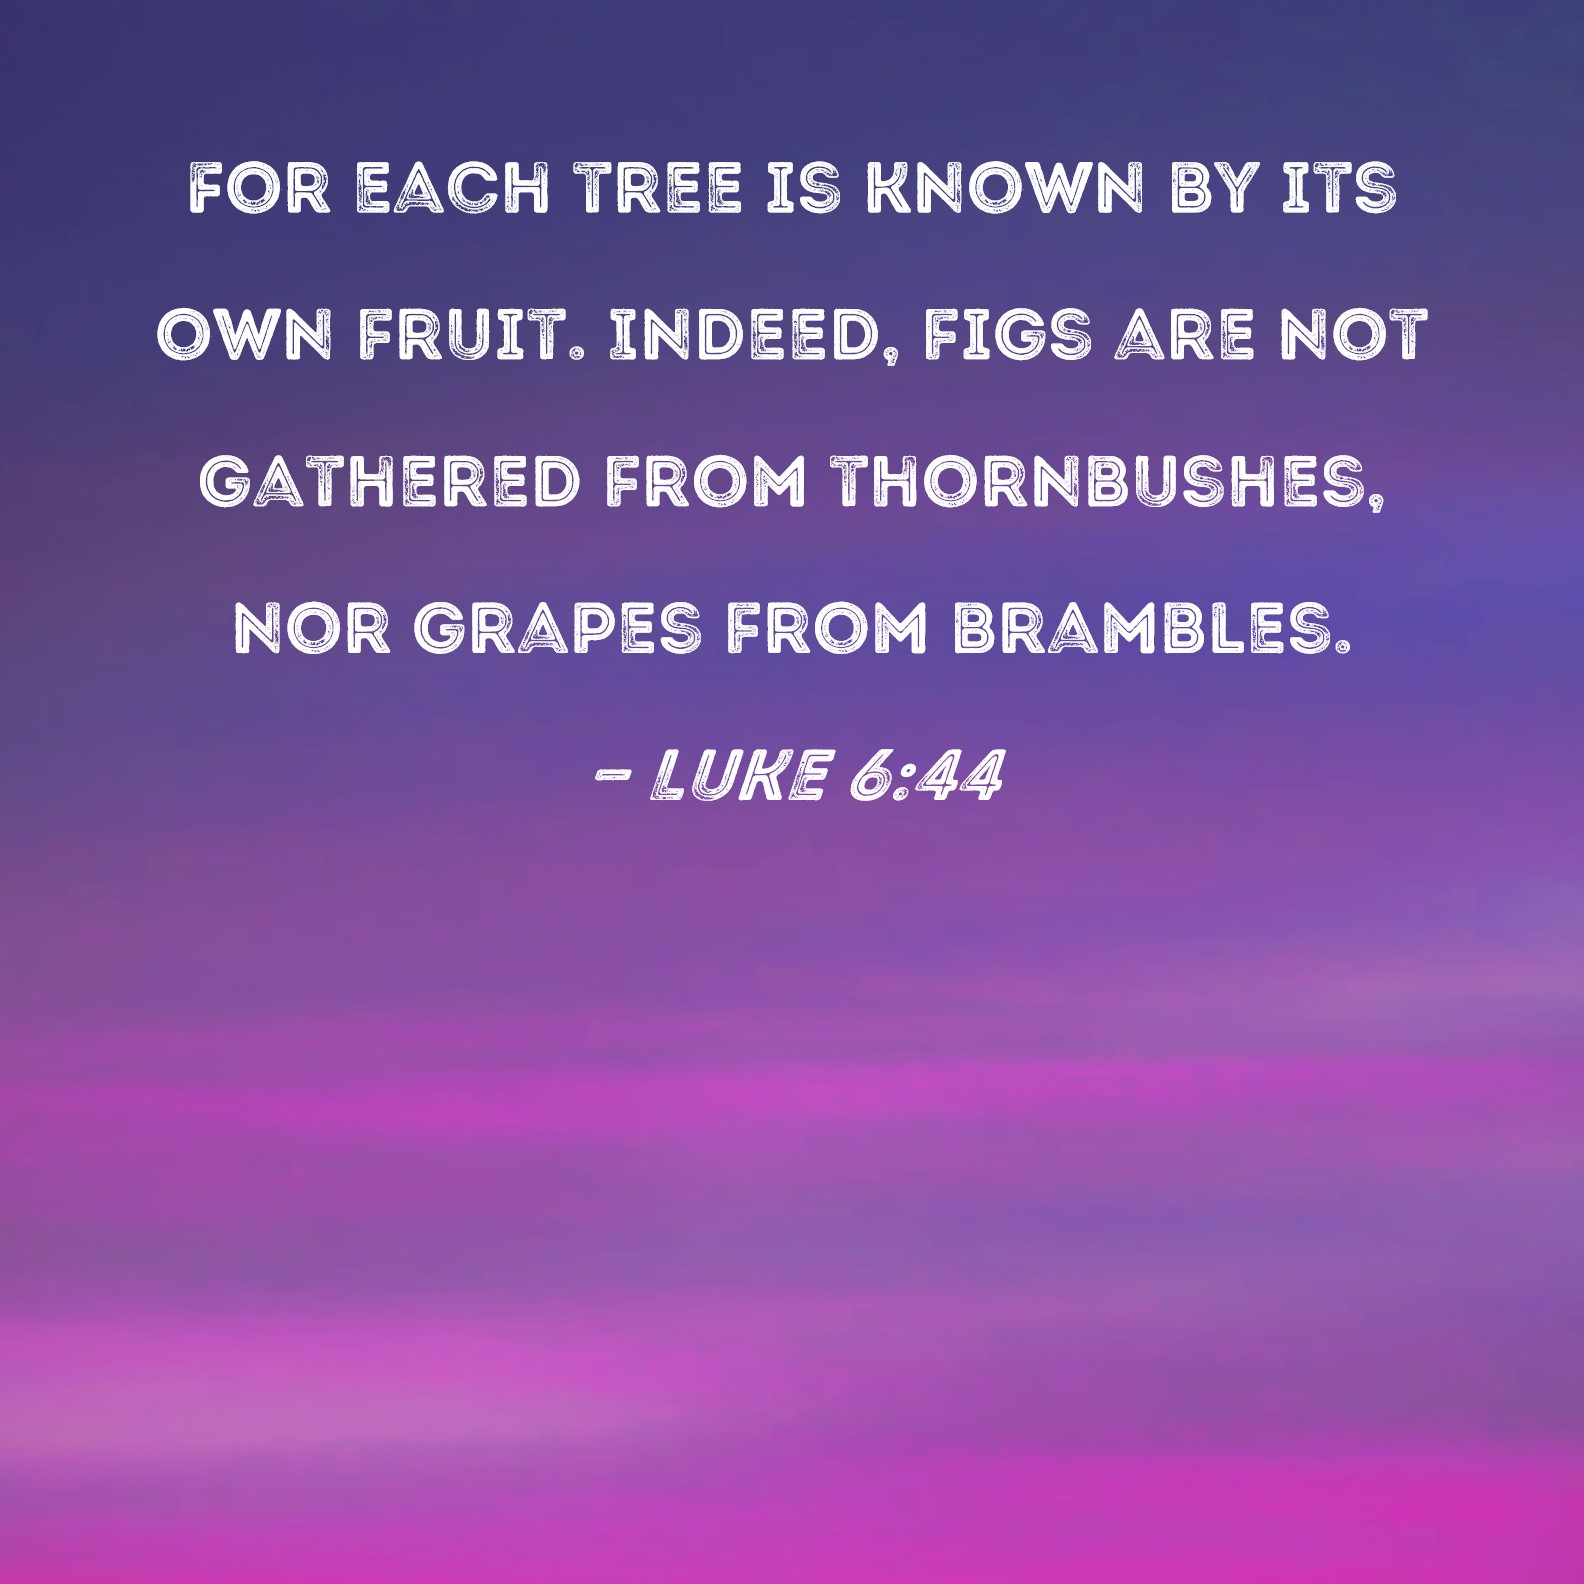 Luke 6:44 For each tree is known by its own fruit. Indeed, figs